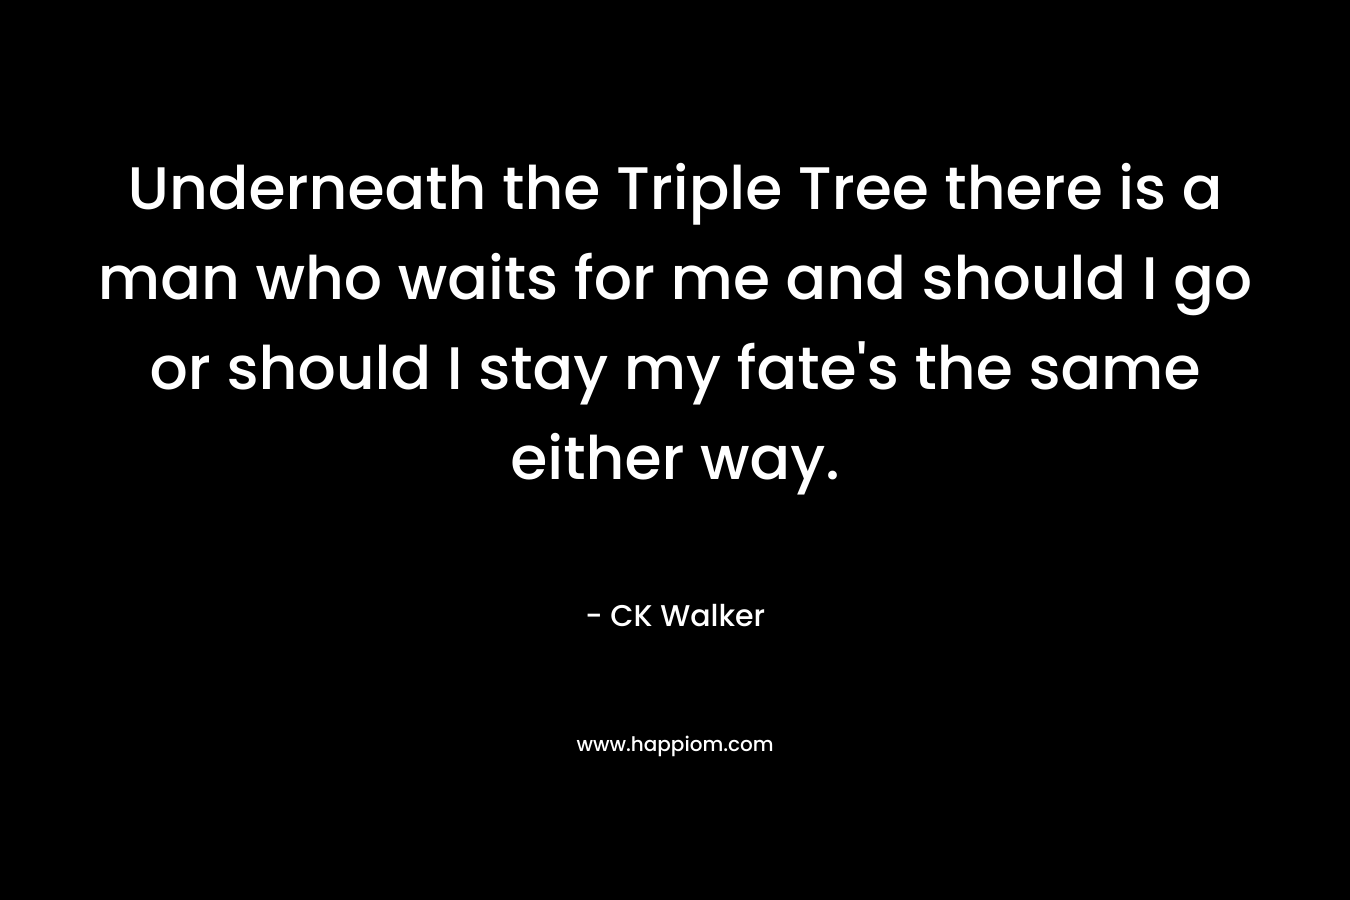 Underneath the Triple Tree there is a man who waits for me and should I go or should I stay my fate’s the same either way. – CK Walker